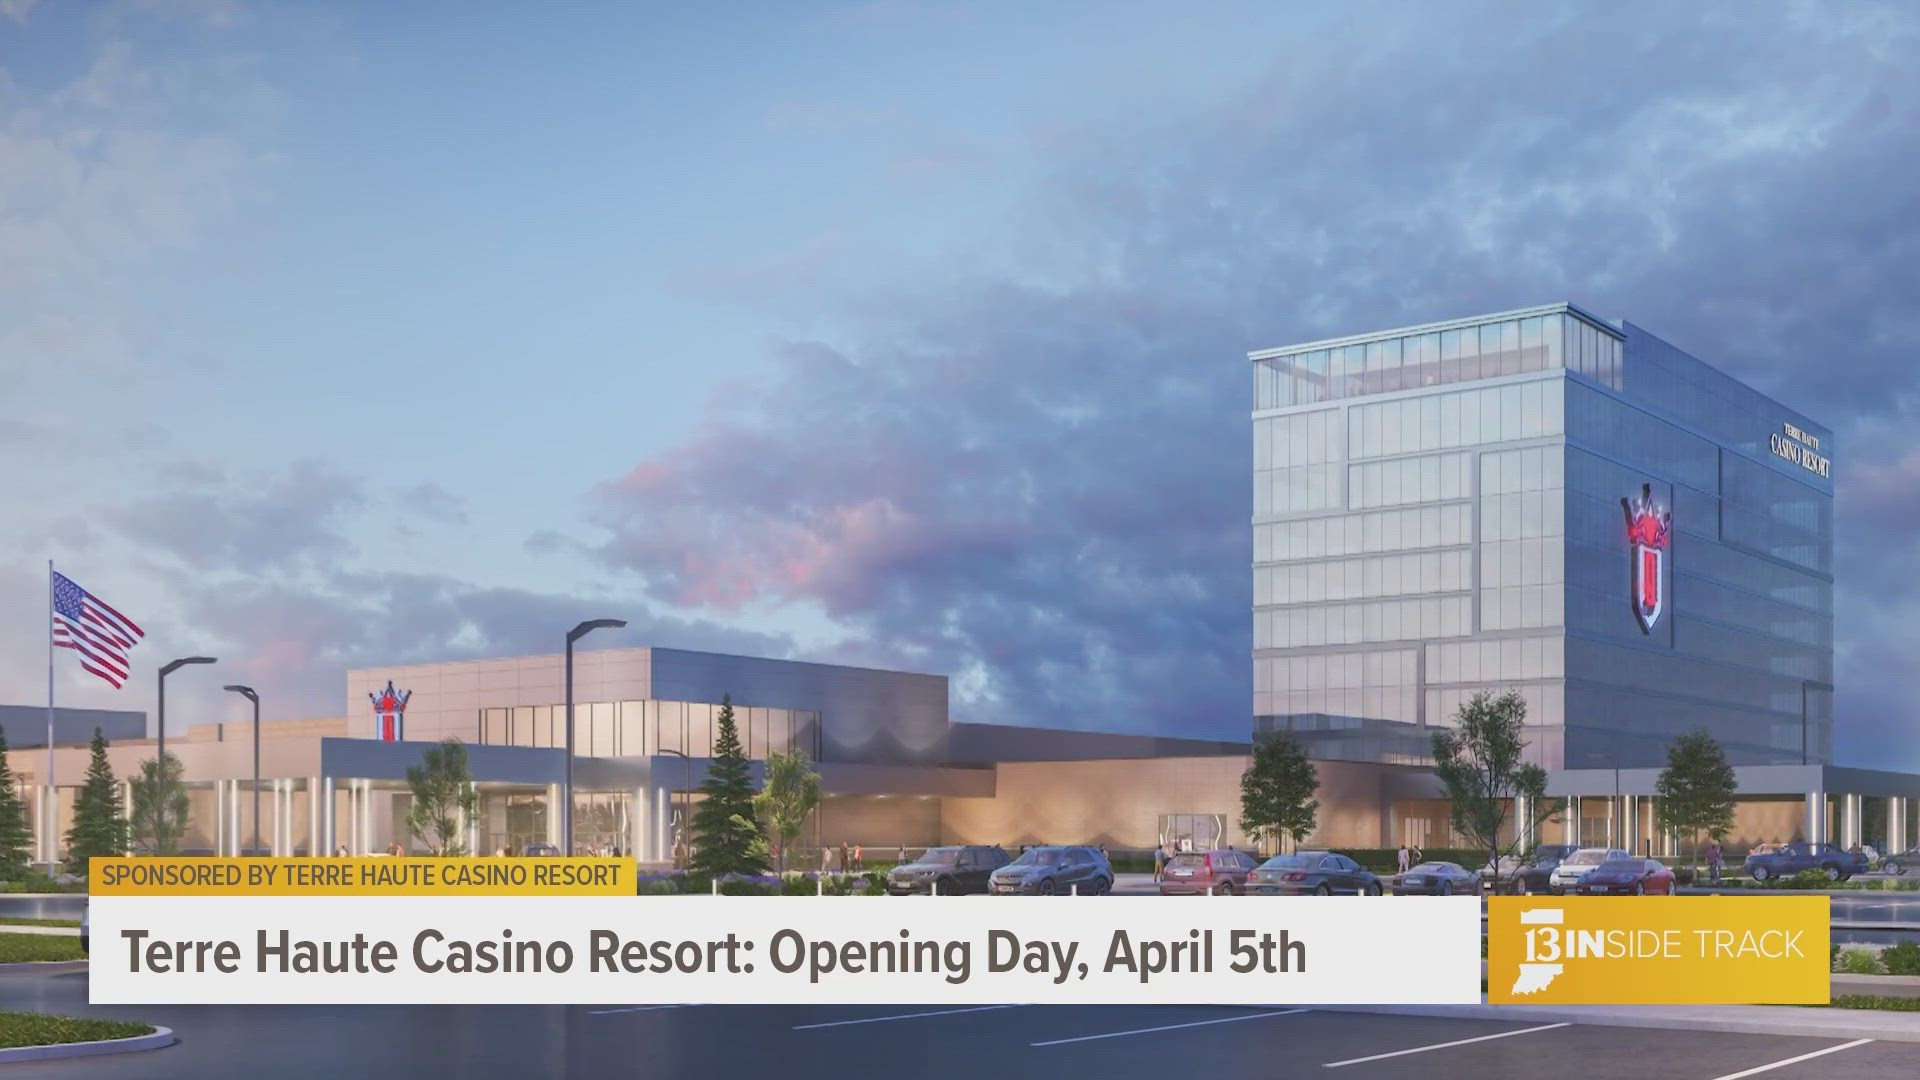 Discover the excitement at Terre Haute Casino Resort opening on April 5th. Enjoy a selection of 1000 games, 35 live tables, diverse dining options, and more.